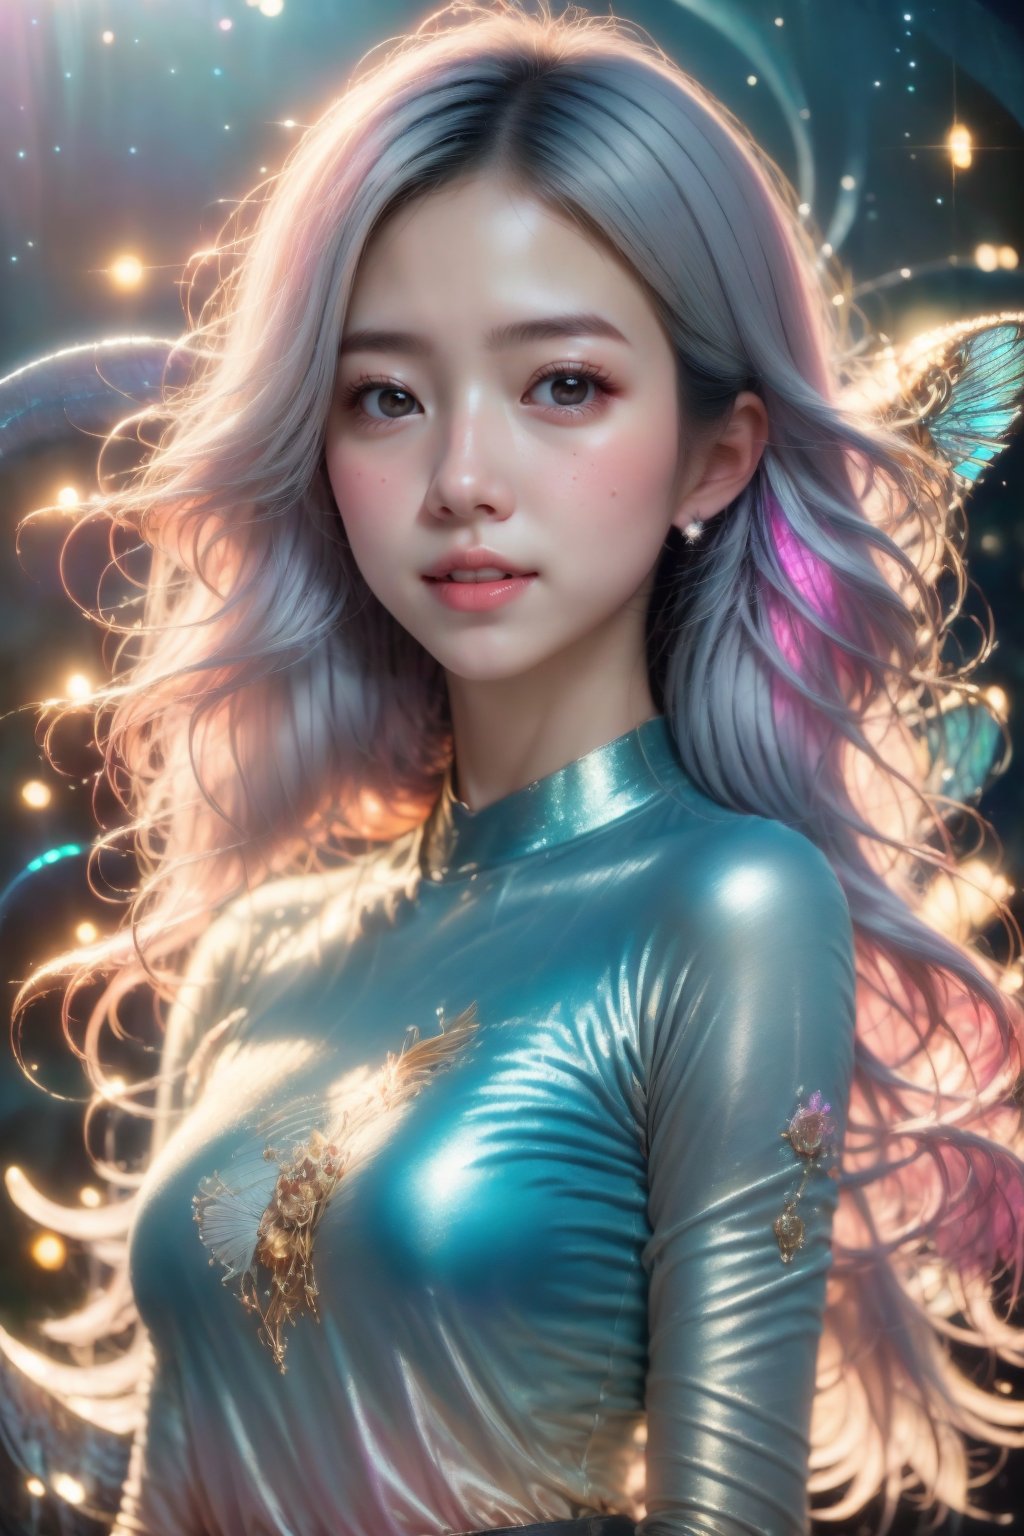 (masterpiece, best quality, CGI, official art:1.2), (stunning celestial being:1.3), (iridescent wings:1.4), shimmering silver hair, piercing sapphire eyes, gentle smile, (luminous aura:1.2), soft focus, whimsical atmosphere, serene emotion, dreamy tone, vibrant intensity, inspired by Hayao Miyazaki's style, ethereal aesthetic, pastel colors with (soft pink accents:1.1), warm mood, soft golden lighting, diagonal shot, looking up in wonder, surrounded by (delicate clouds:1.1) and (shimmering stardust:1.2), focal point on the being's face, intricate textures on wings and clothes, highly realistic fabric texture, atmospheric mist effect, high image complexity, detailed environment, subtle movement of wings, dynamic energy.,Enhance